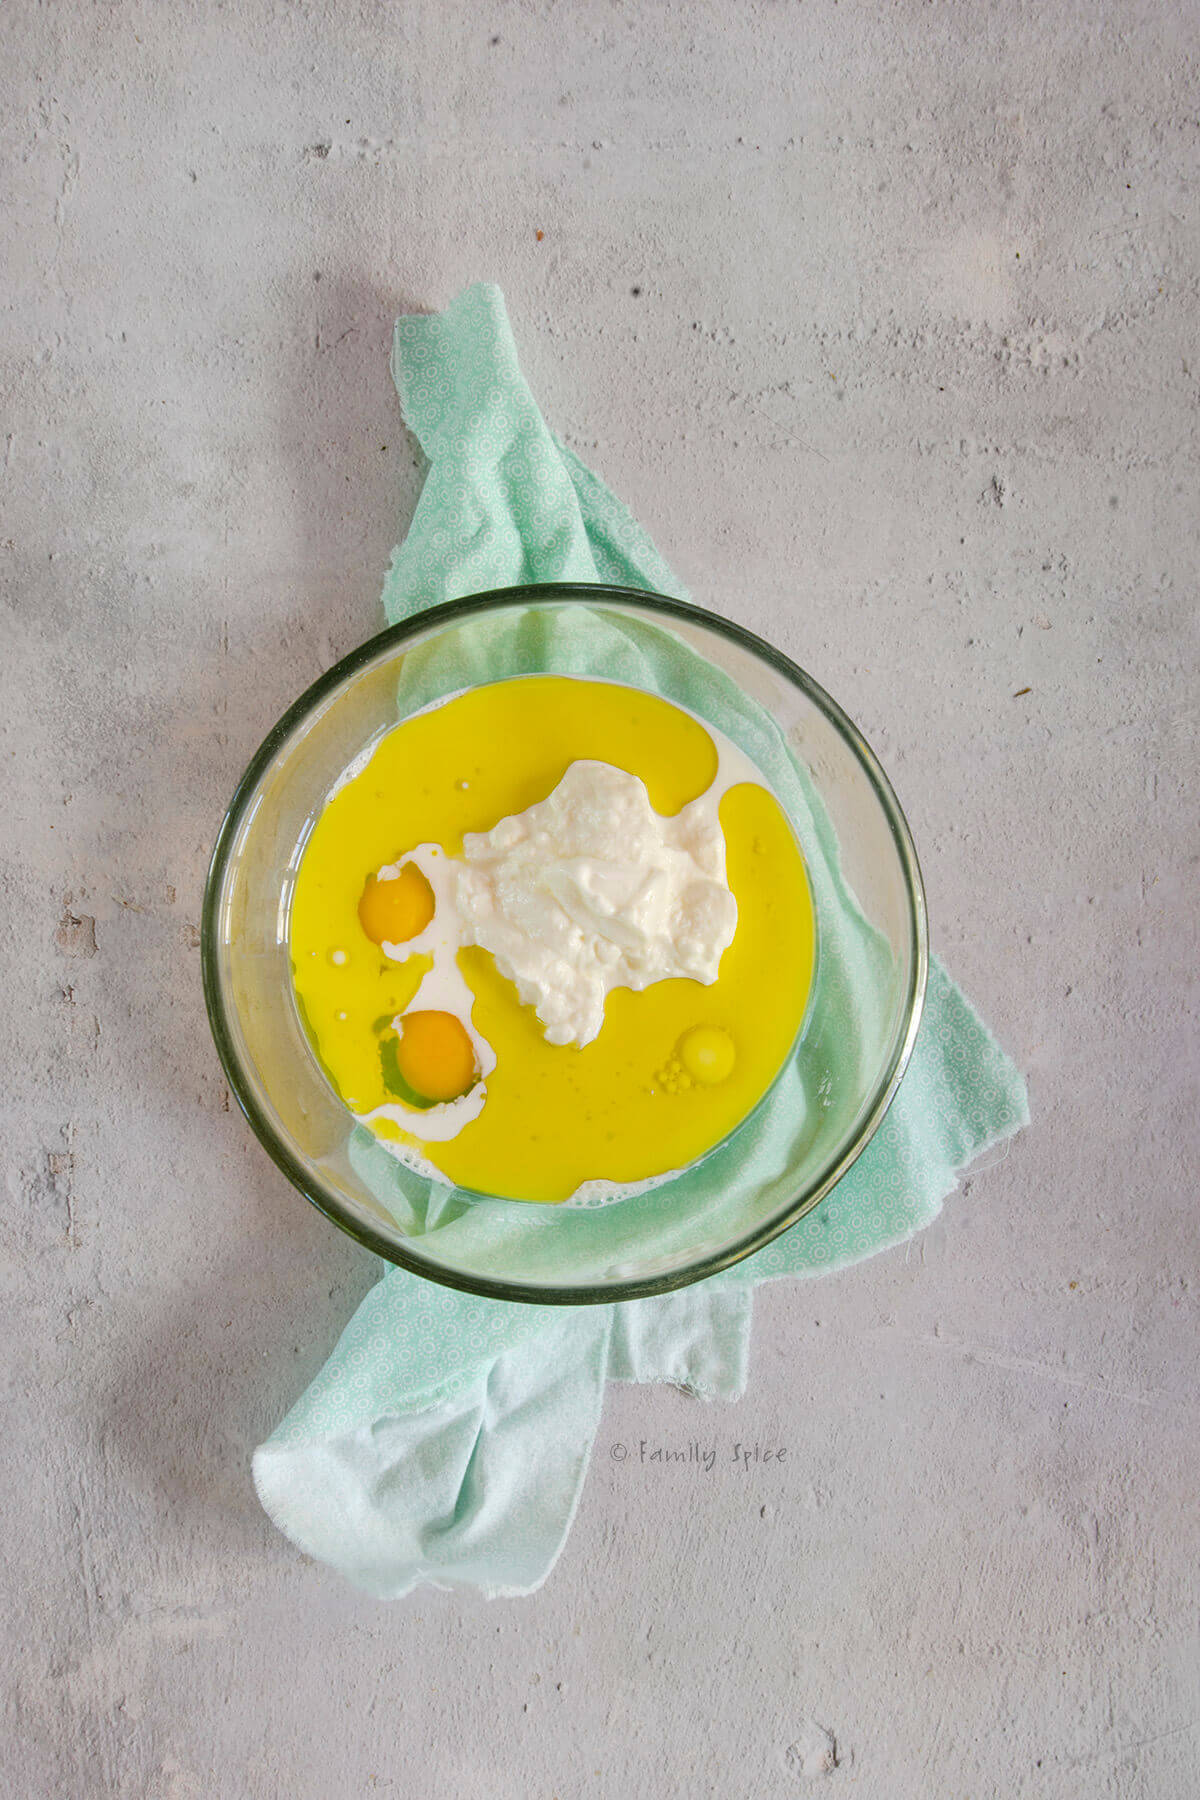 Olive oil, extra, yogurt and milk in a glass mixing bowl